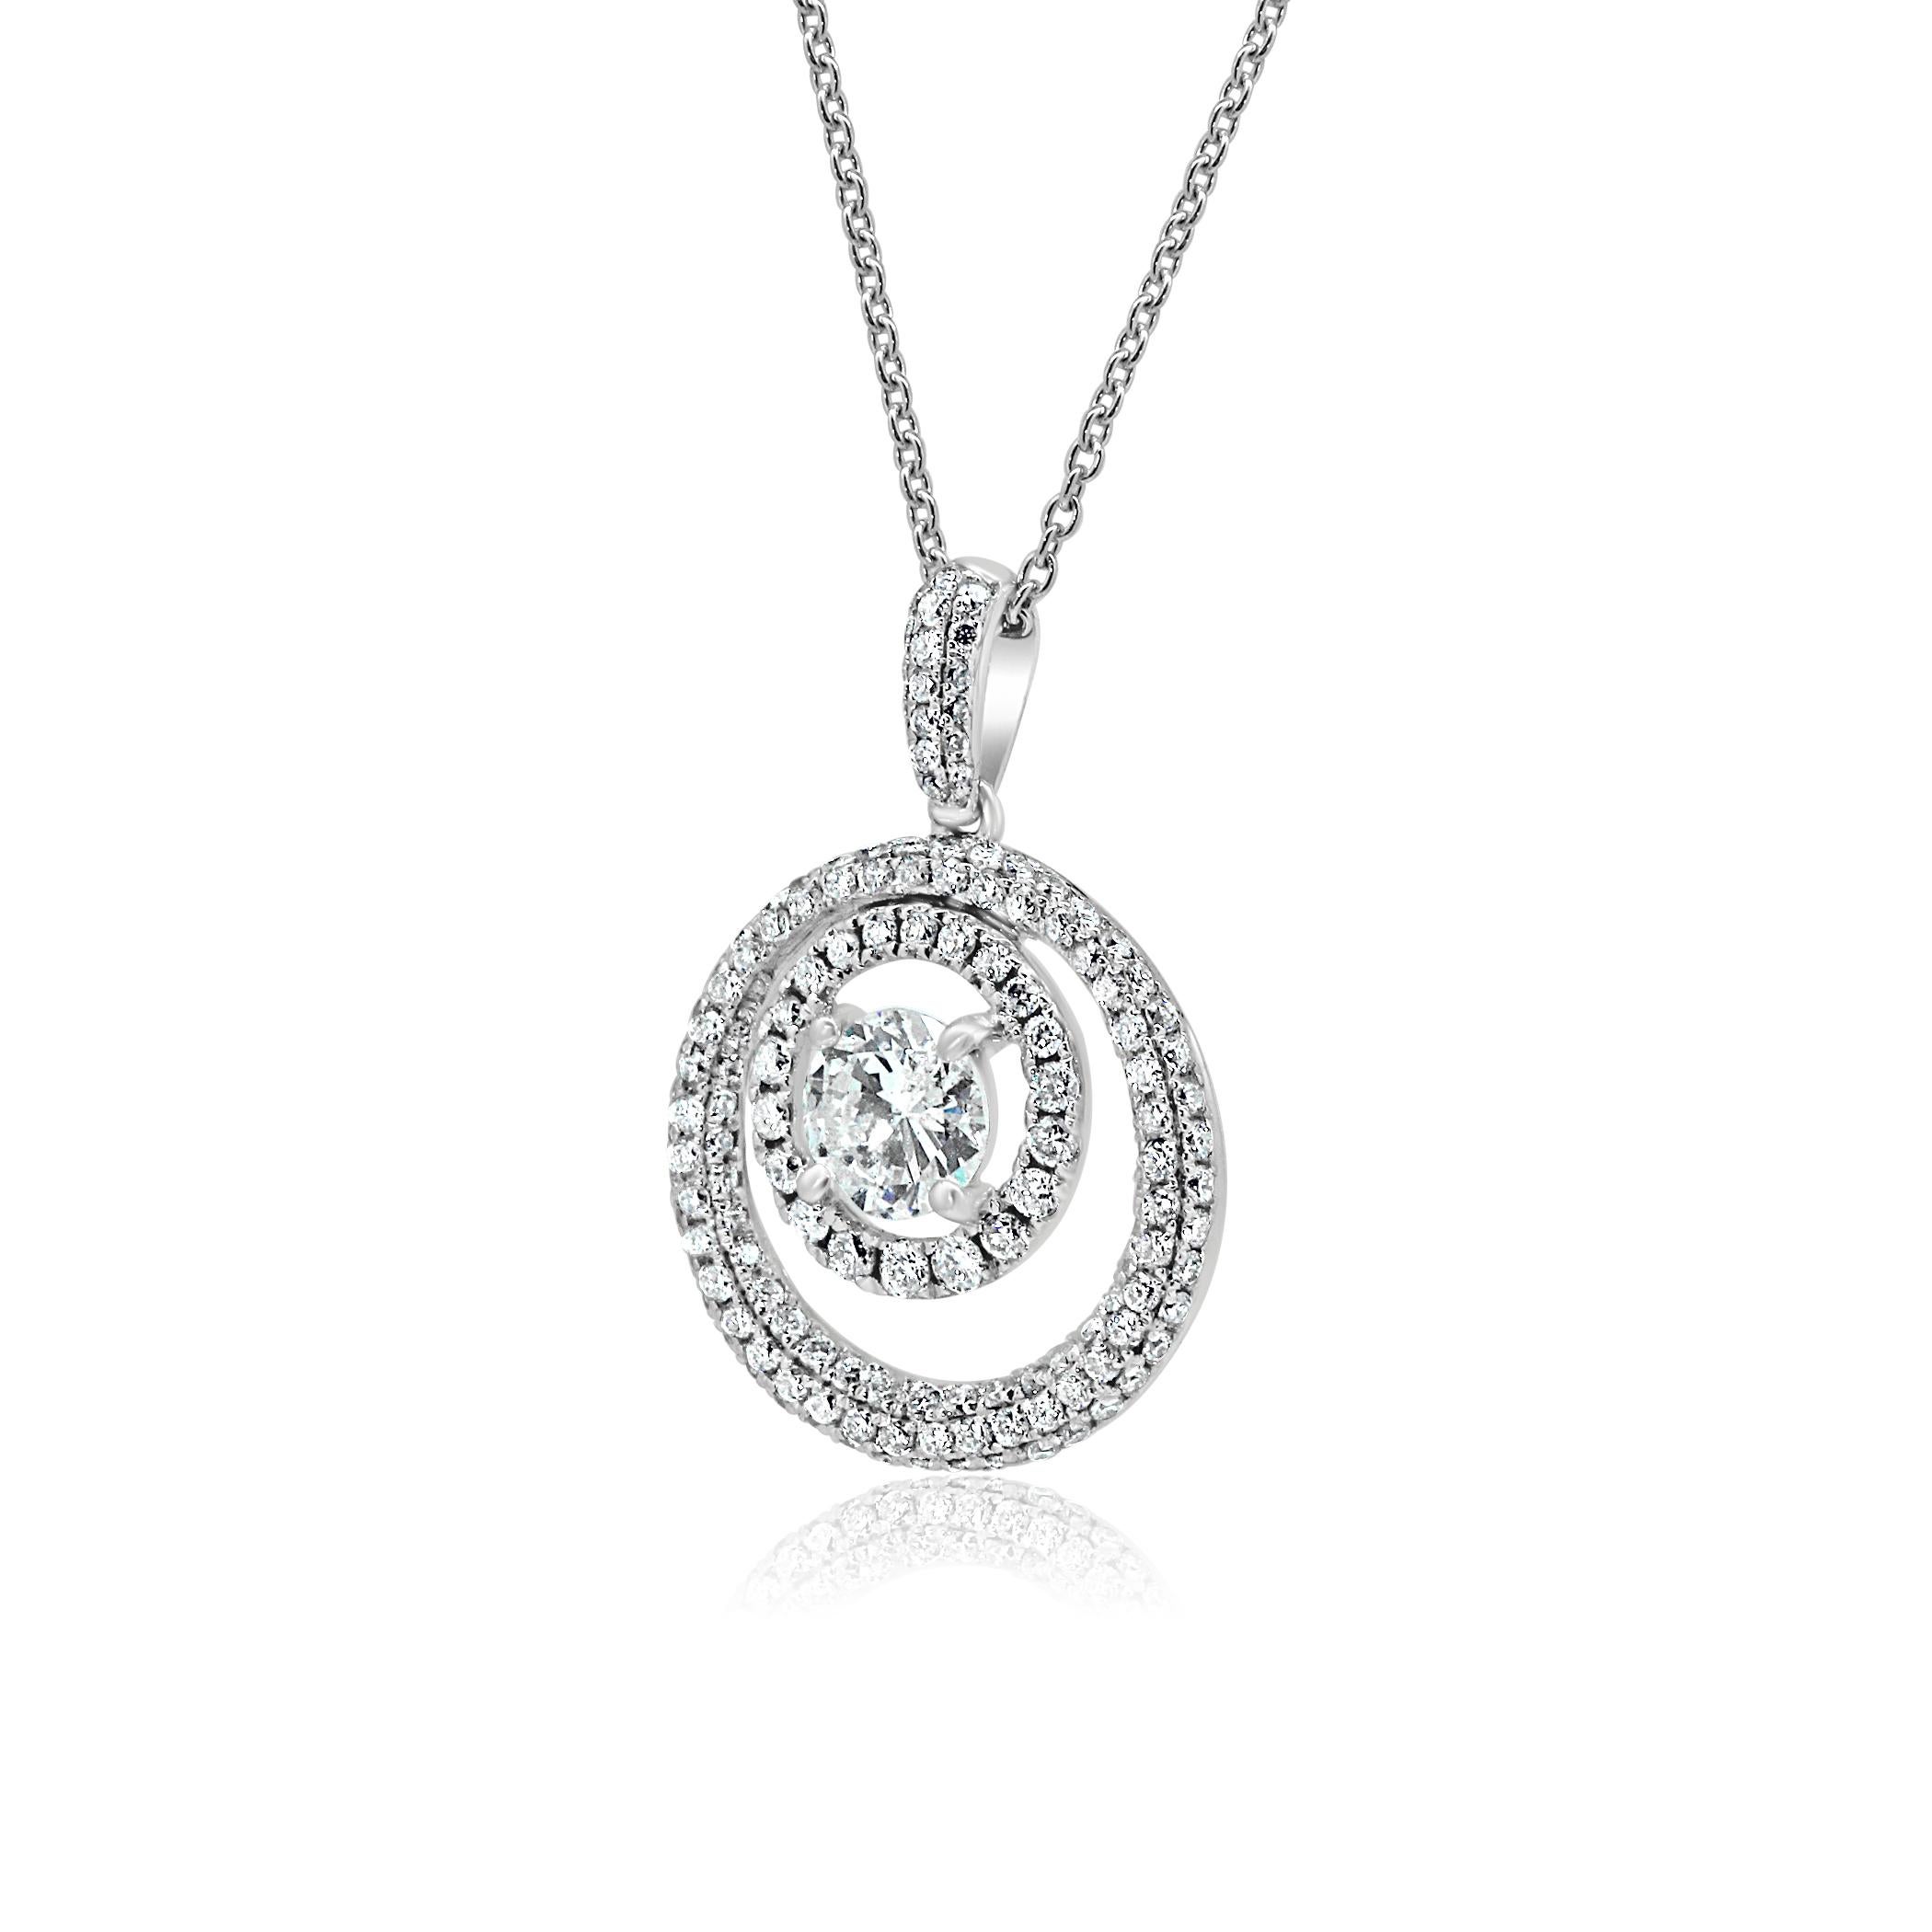 Contemporary 2.05 Carat Total Weight Round Diamond Double Halo Gold Pendant Chain Necklace